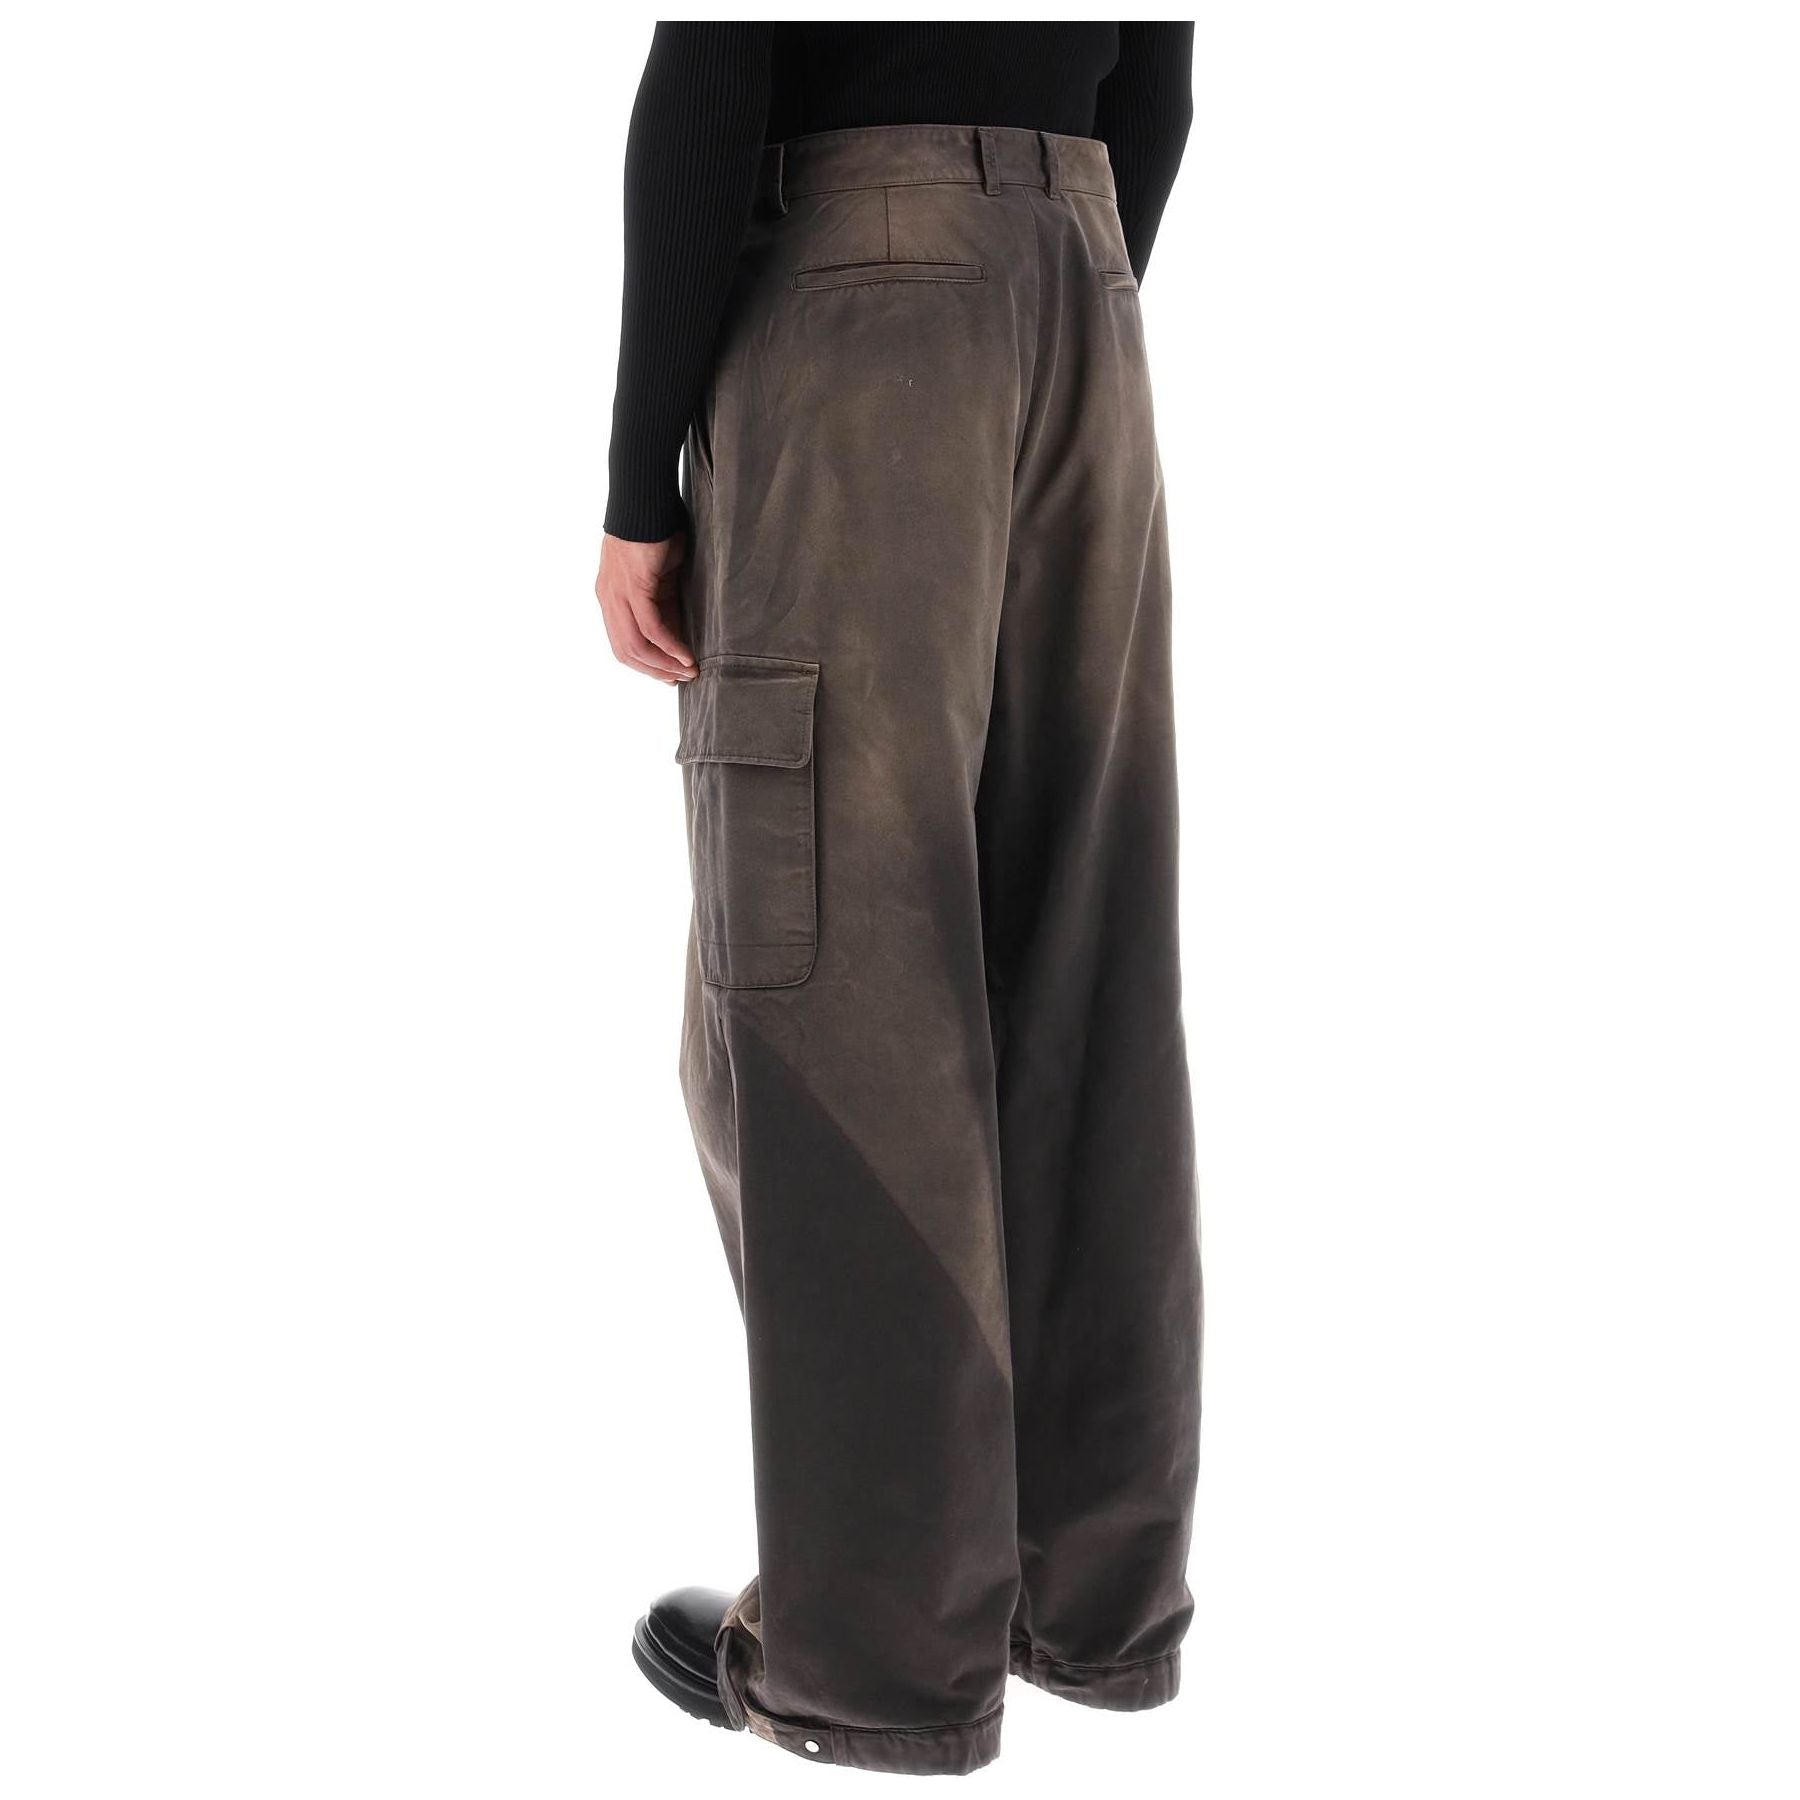 Washed Effect Cargo Pants